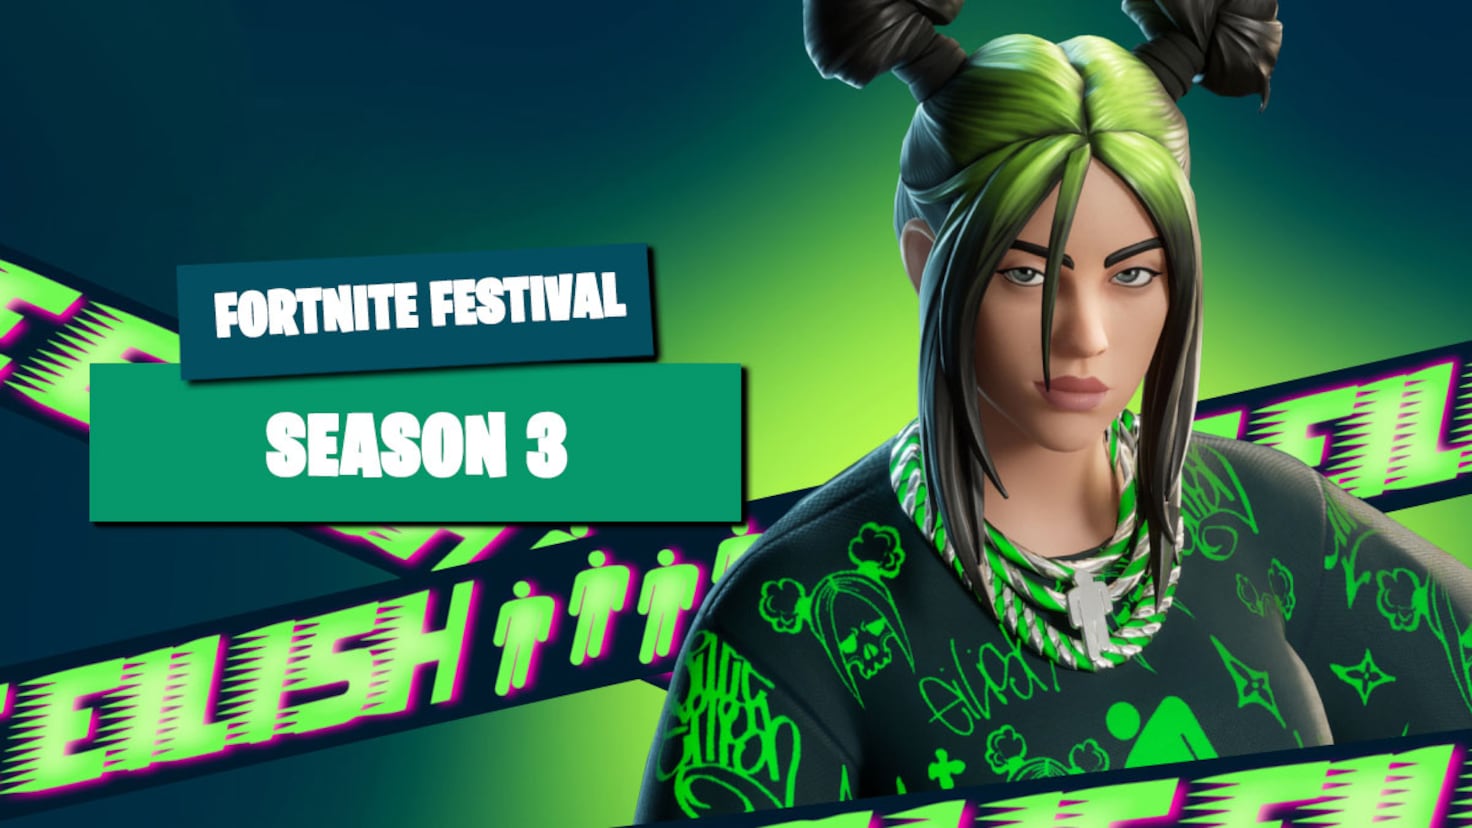 Billie Eilish is coming to Fortnite Festival Season 3 with a new outfit ...